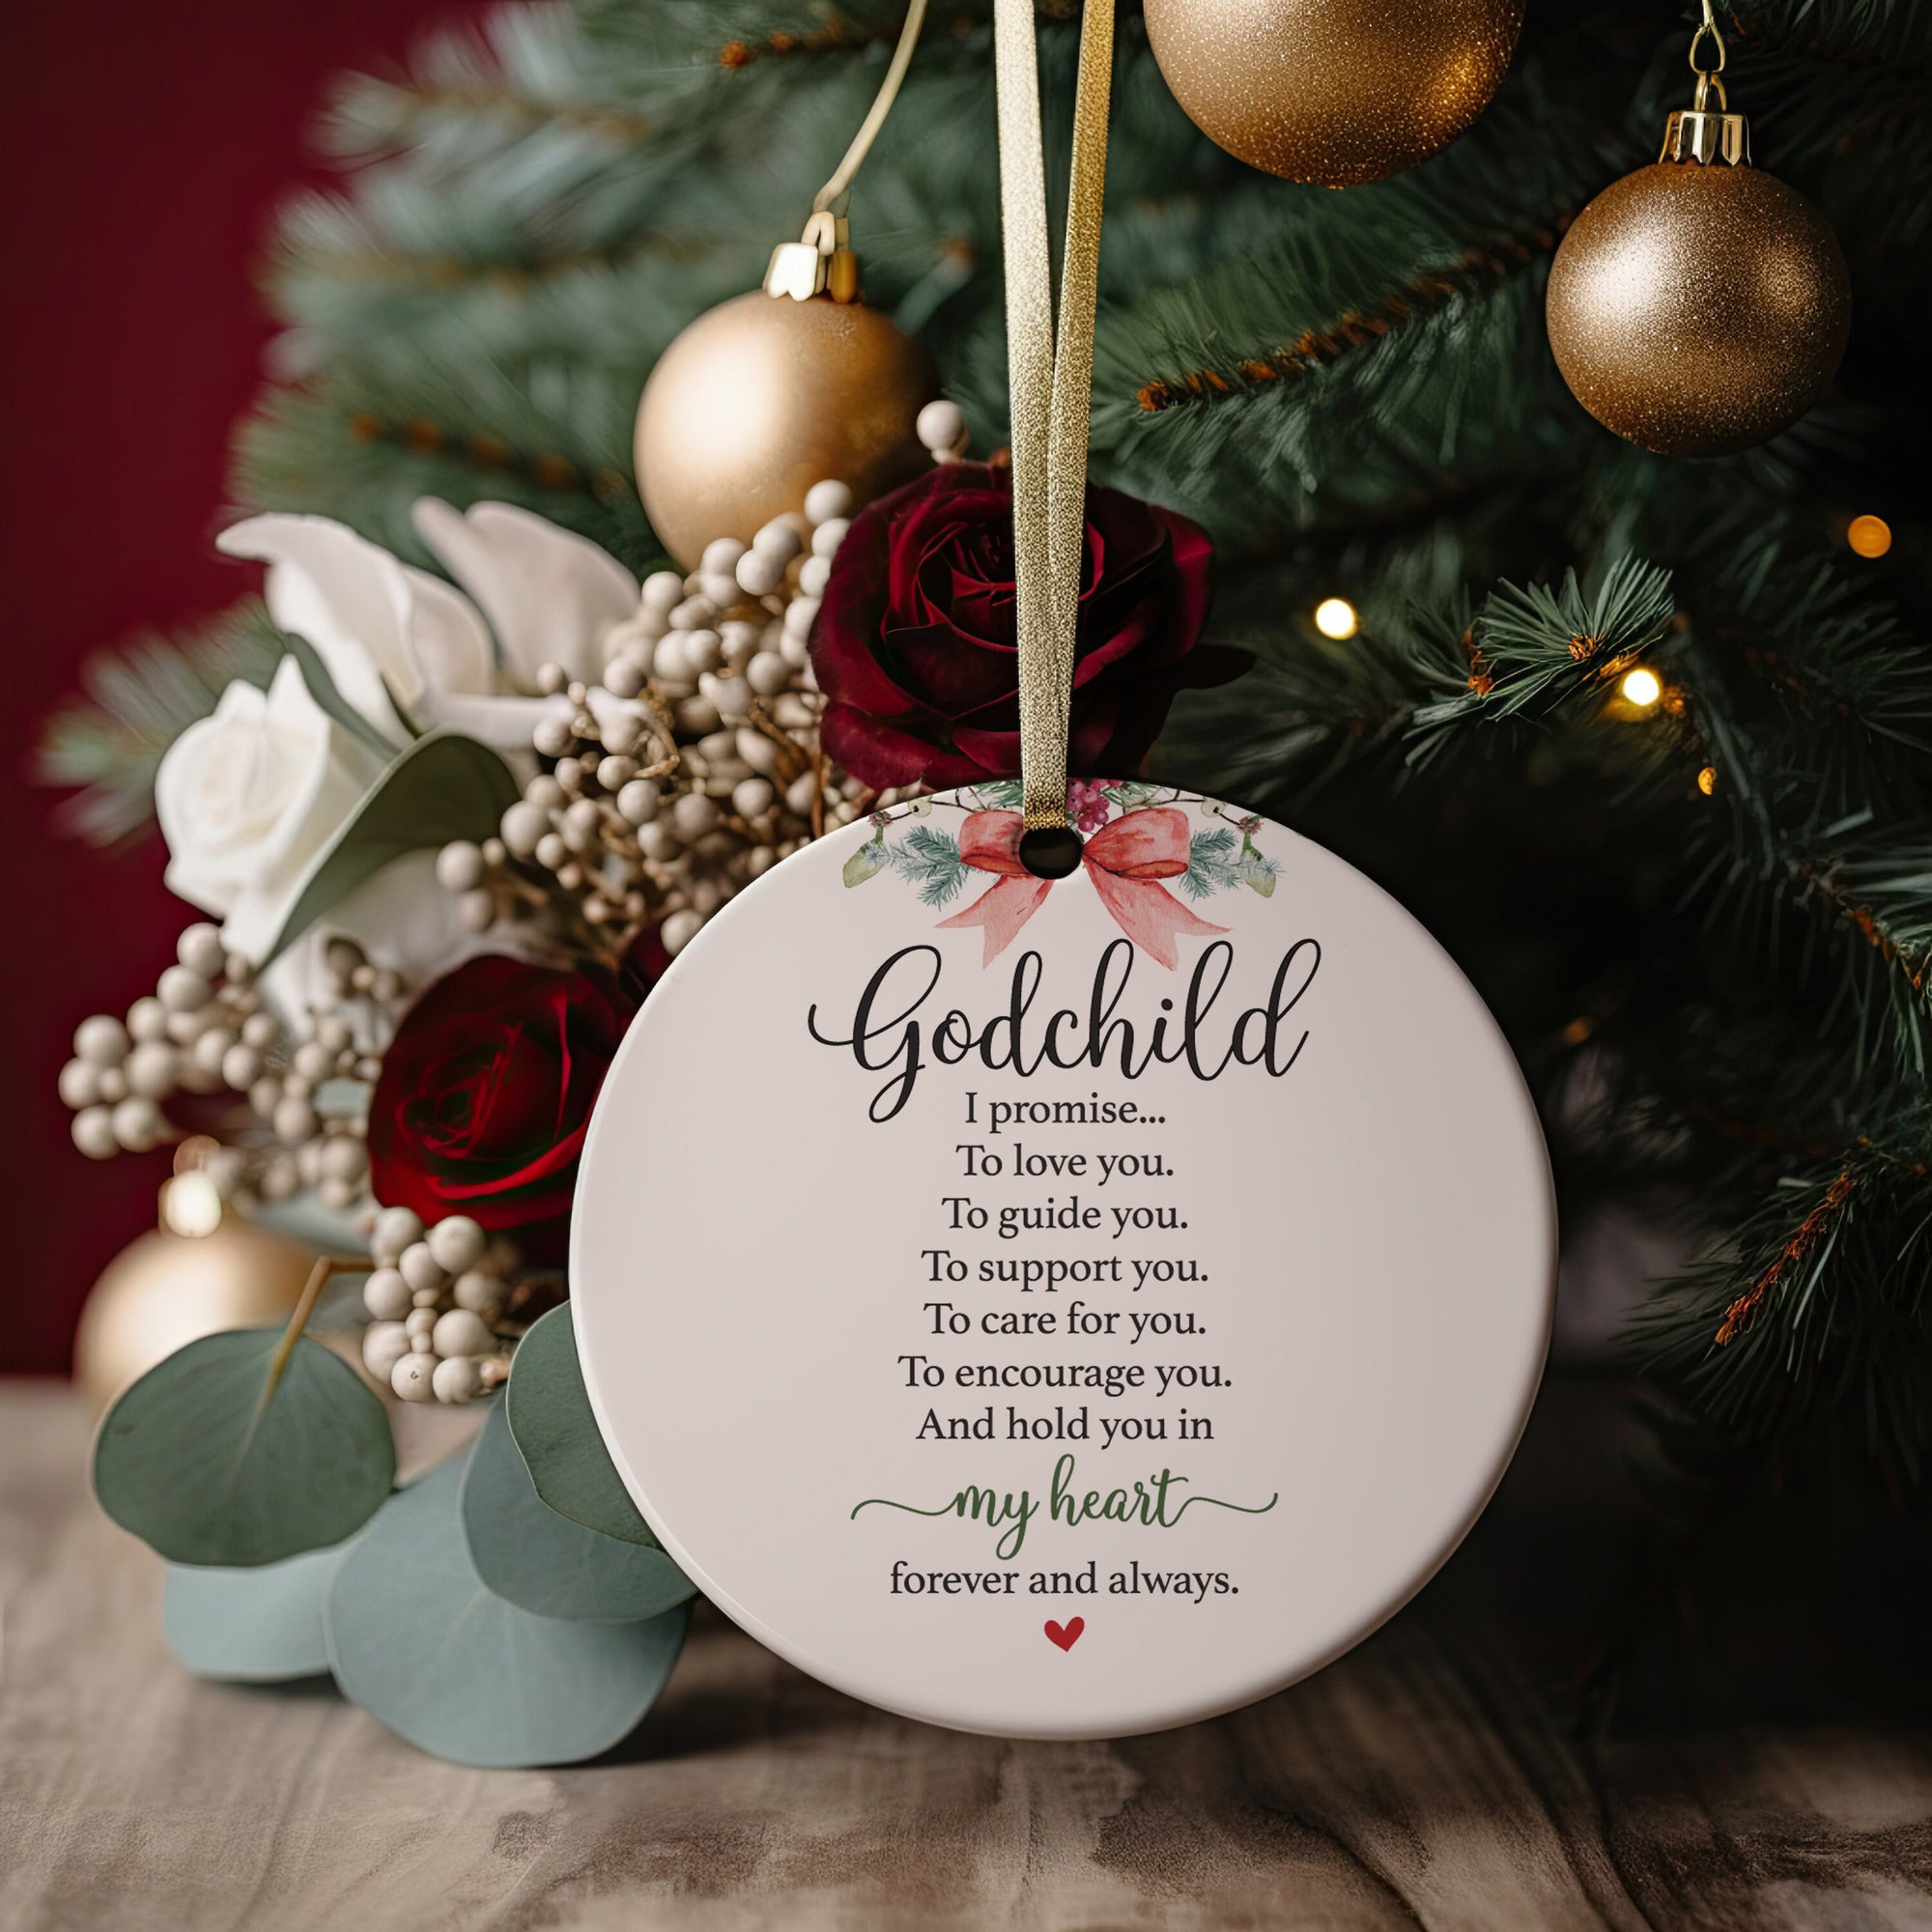 Godchild I Promise Gift From Godmother or Godfather Christmas Gift, Ornament From Godparent, Godmother or Godfather, Baby&#39;s First Christmas